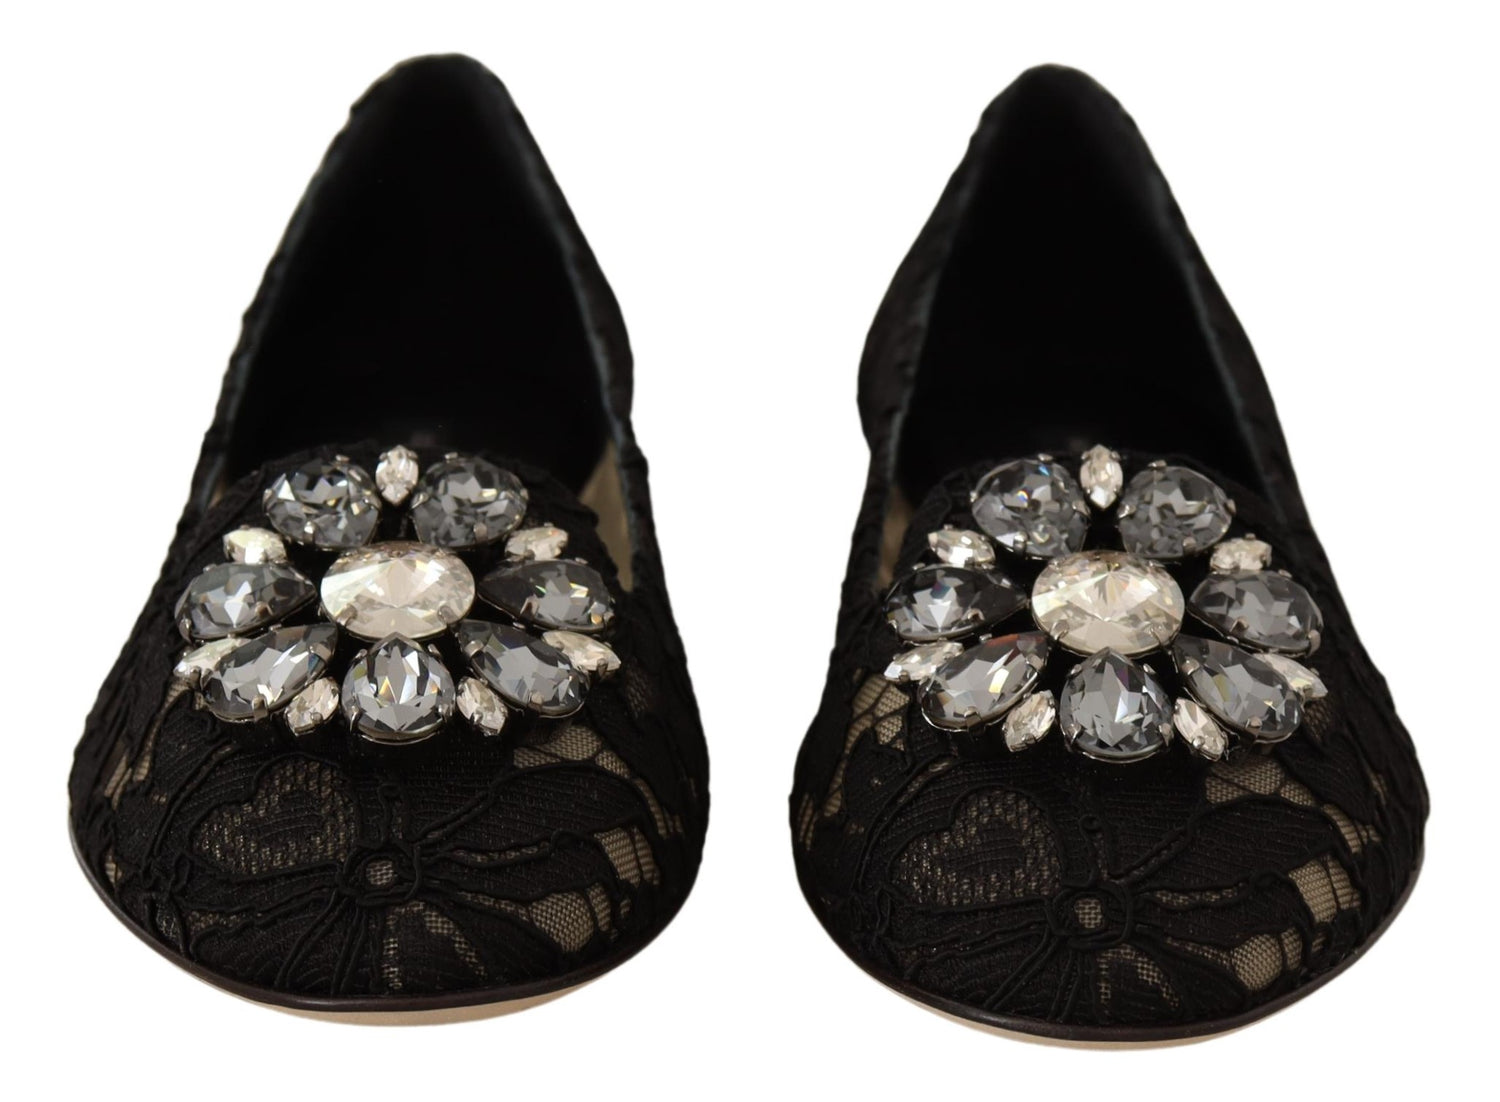 Black Taormina Lace Crystal Loafers Shoes